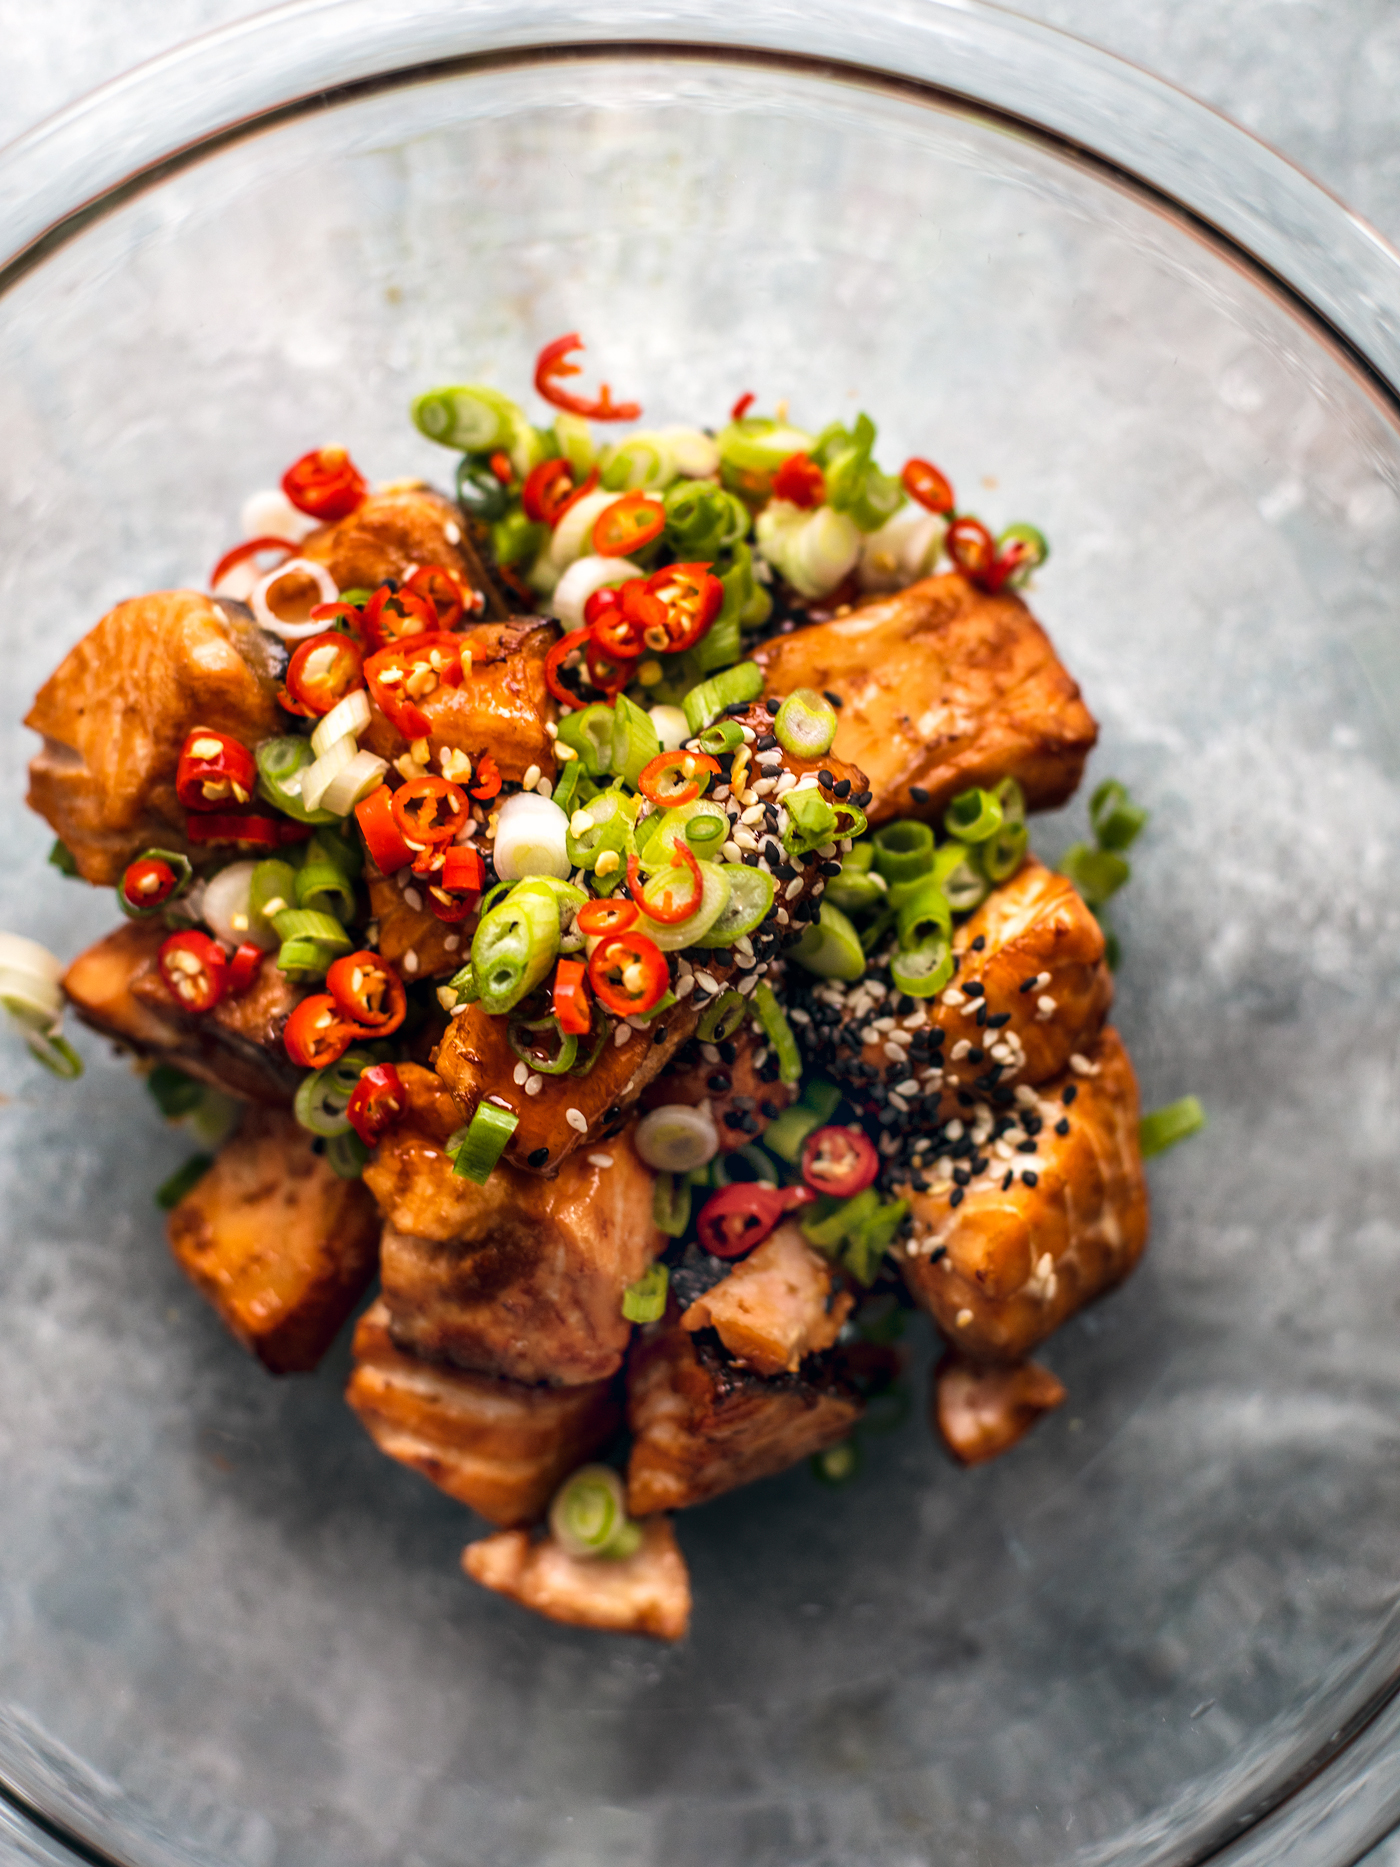 Glass mixing bowl full of salmon bites topped with sweet chili sauce, scallions, sesame seeds, and Thai chilies.